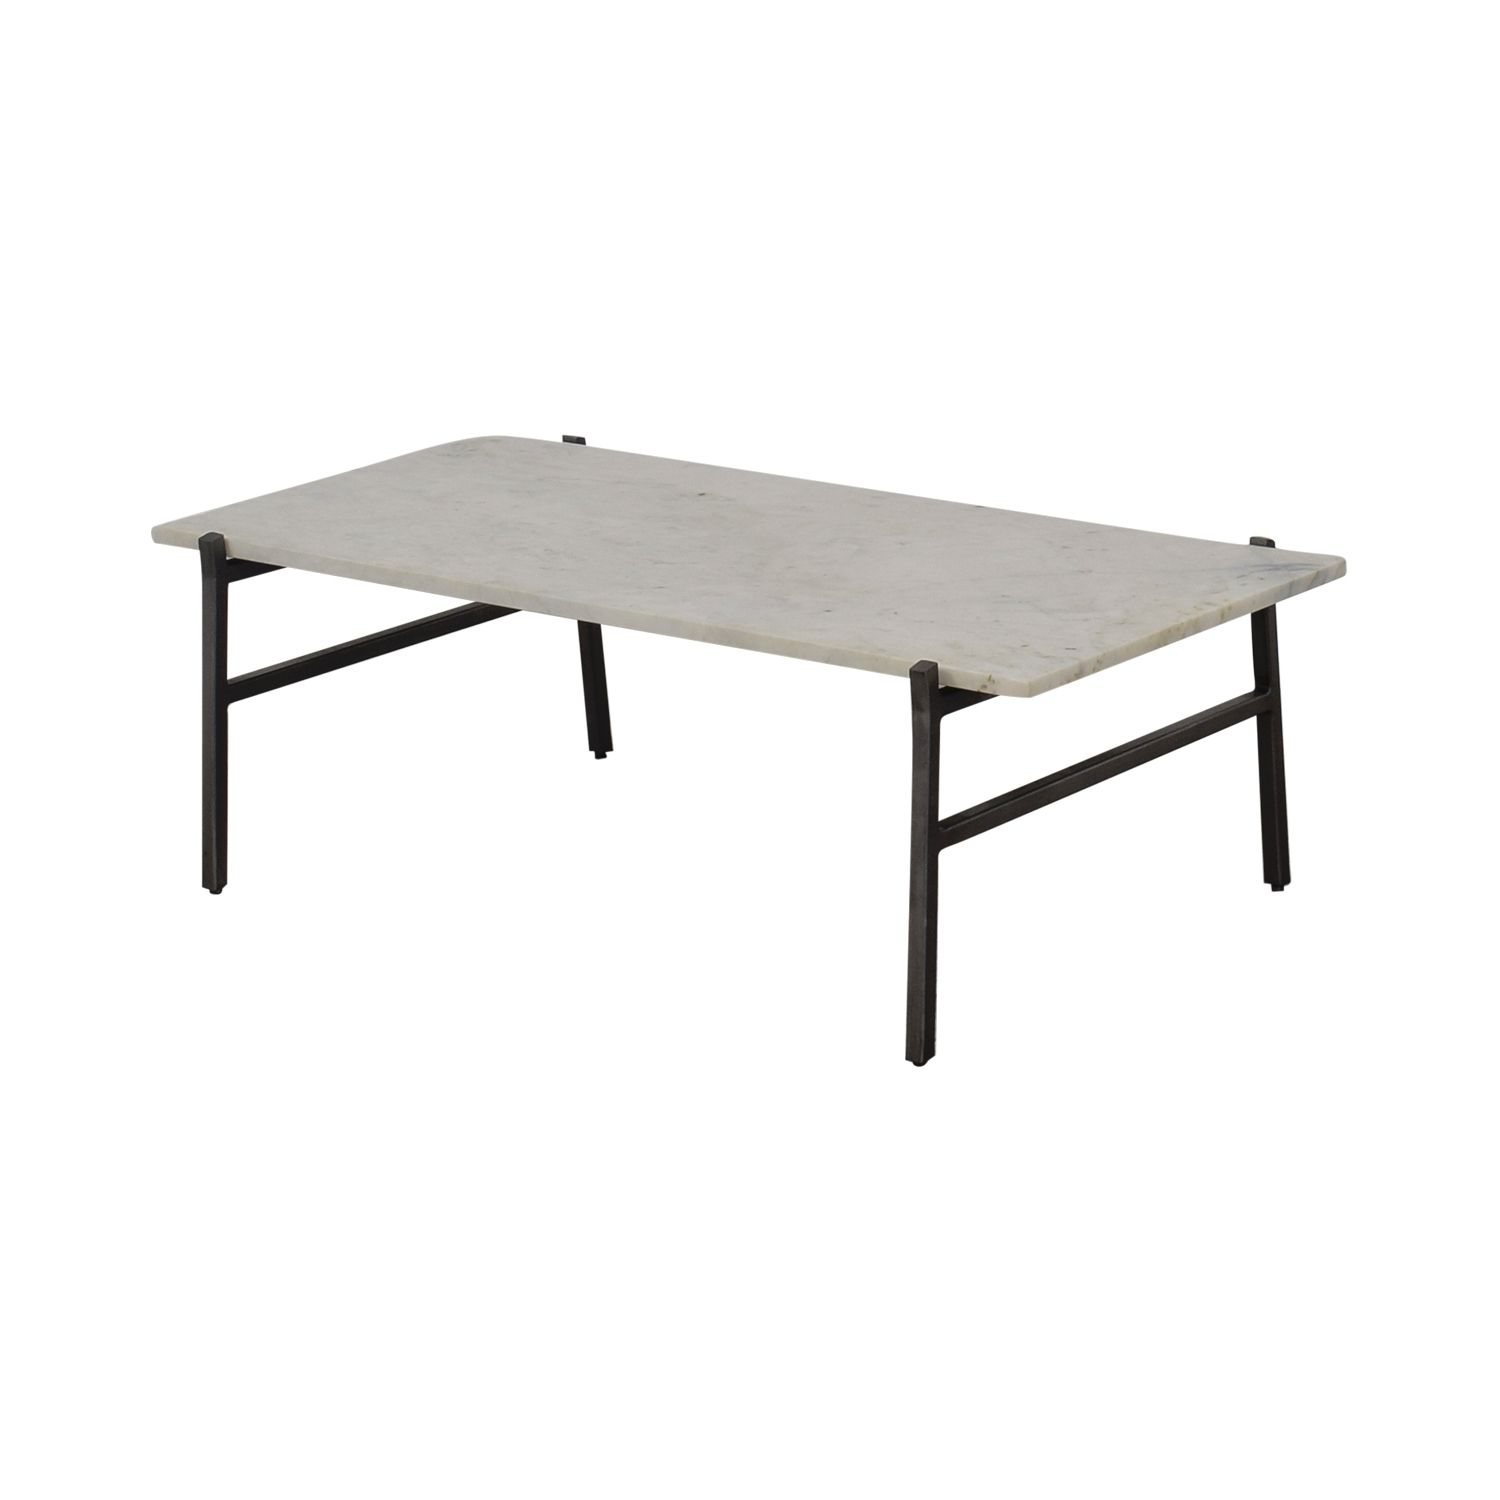 [%favorite Slab Small Marble Coffee Tables With Antiqued Silver Base For 24% Off – Cb2 Cb2 Slab Small Marble Coffee Table With Antiqued|24% Off – Cb2 Cb2 Slab Small Marble Coffee Table With Antiqued Pertaining To Most Current Slab Small Marble Coffee Tables With Antiqued Silver Base%] (View 3 of 20)